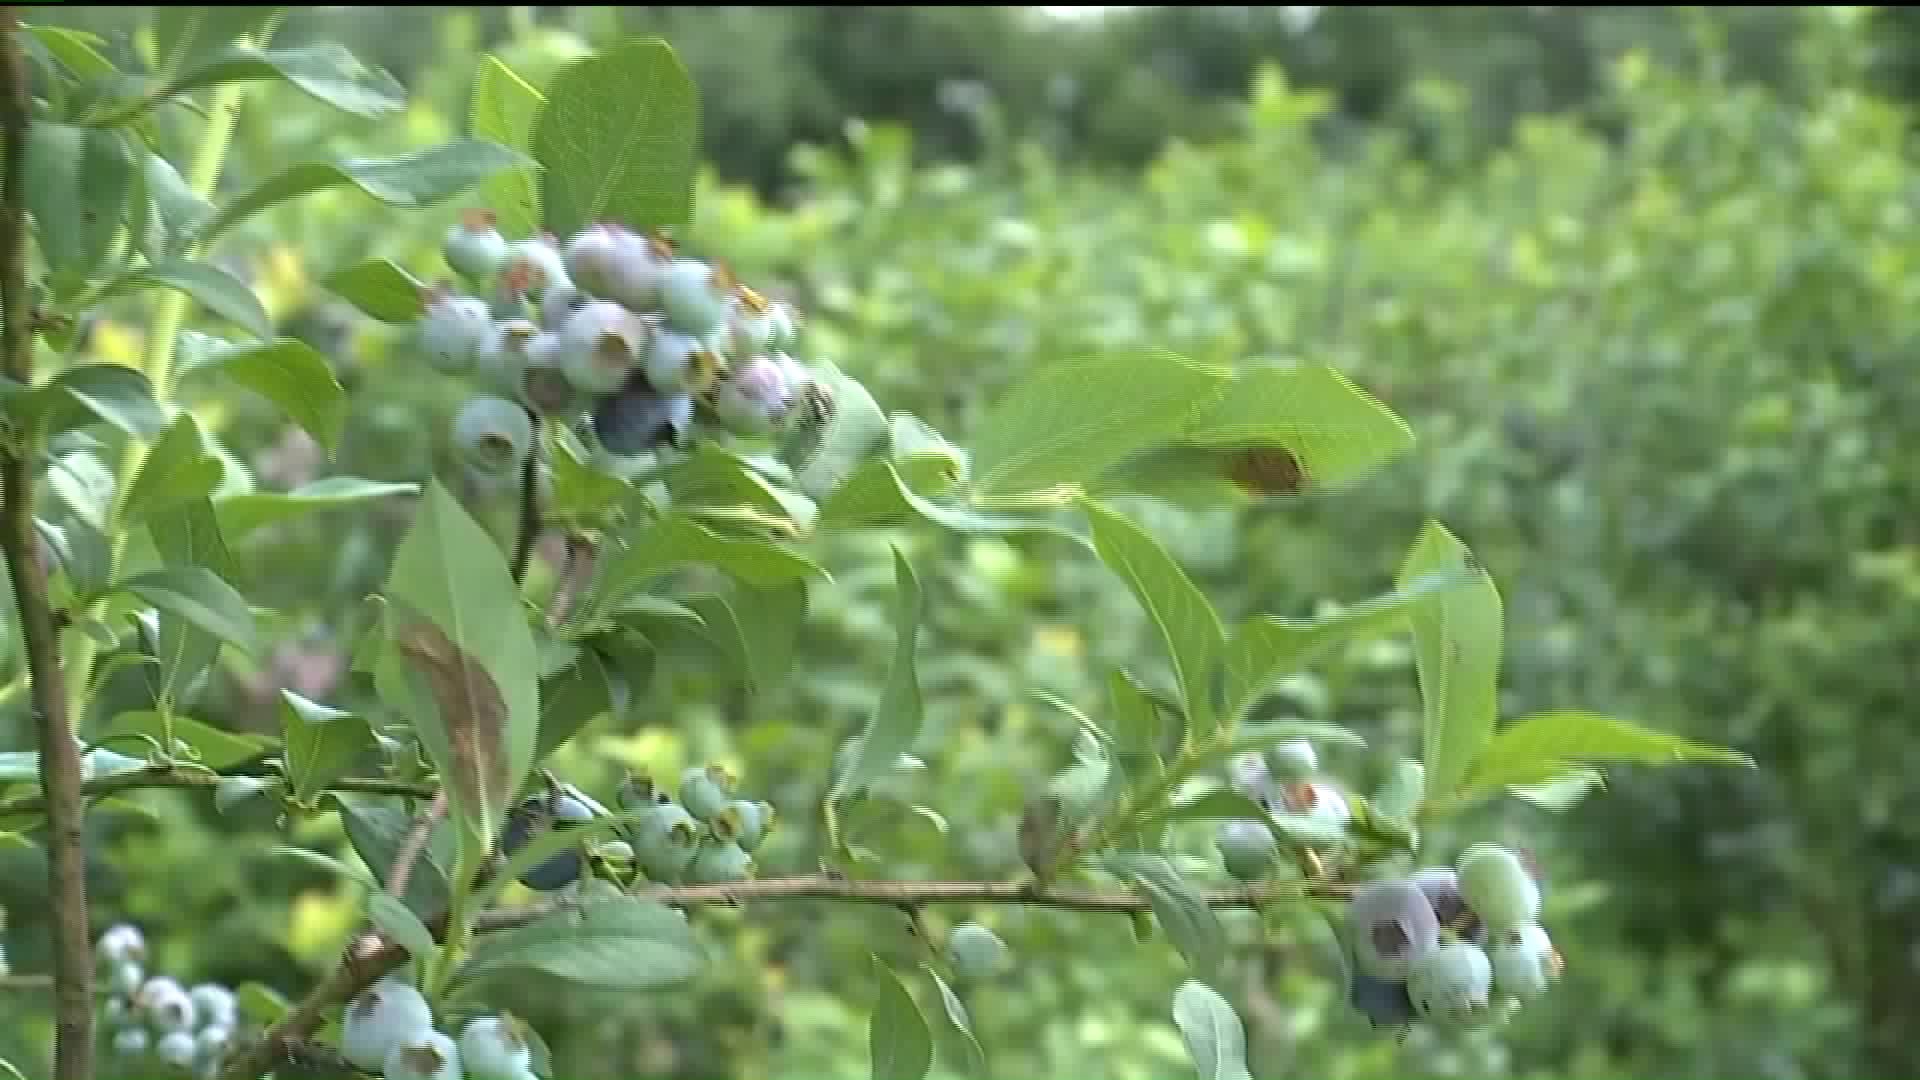 Blueberry Picking Season is Here